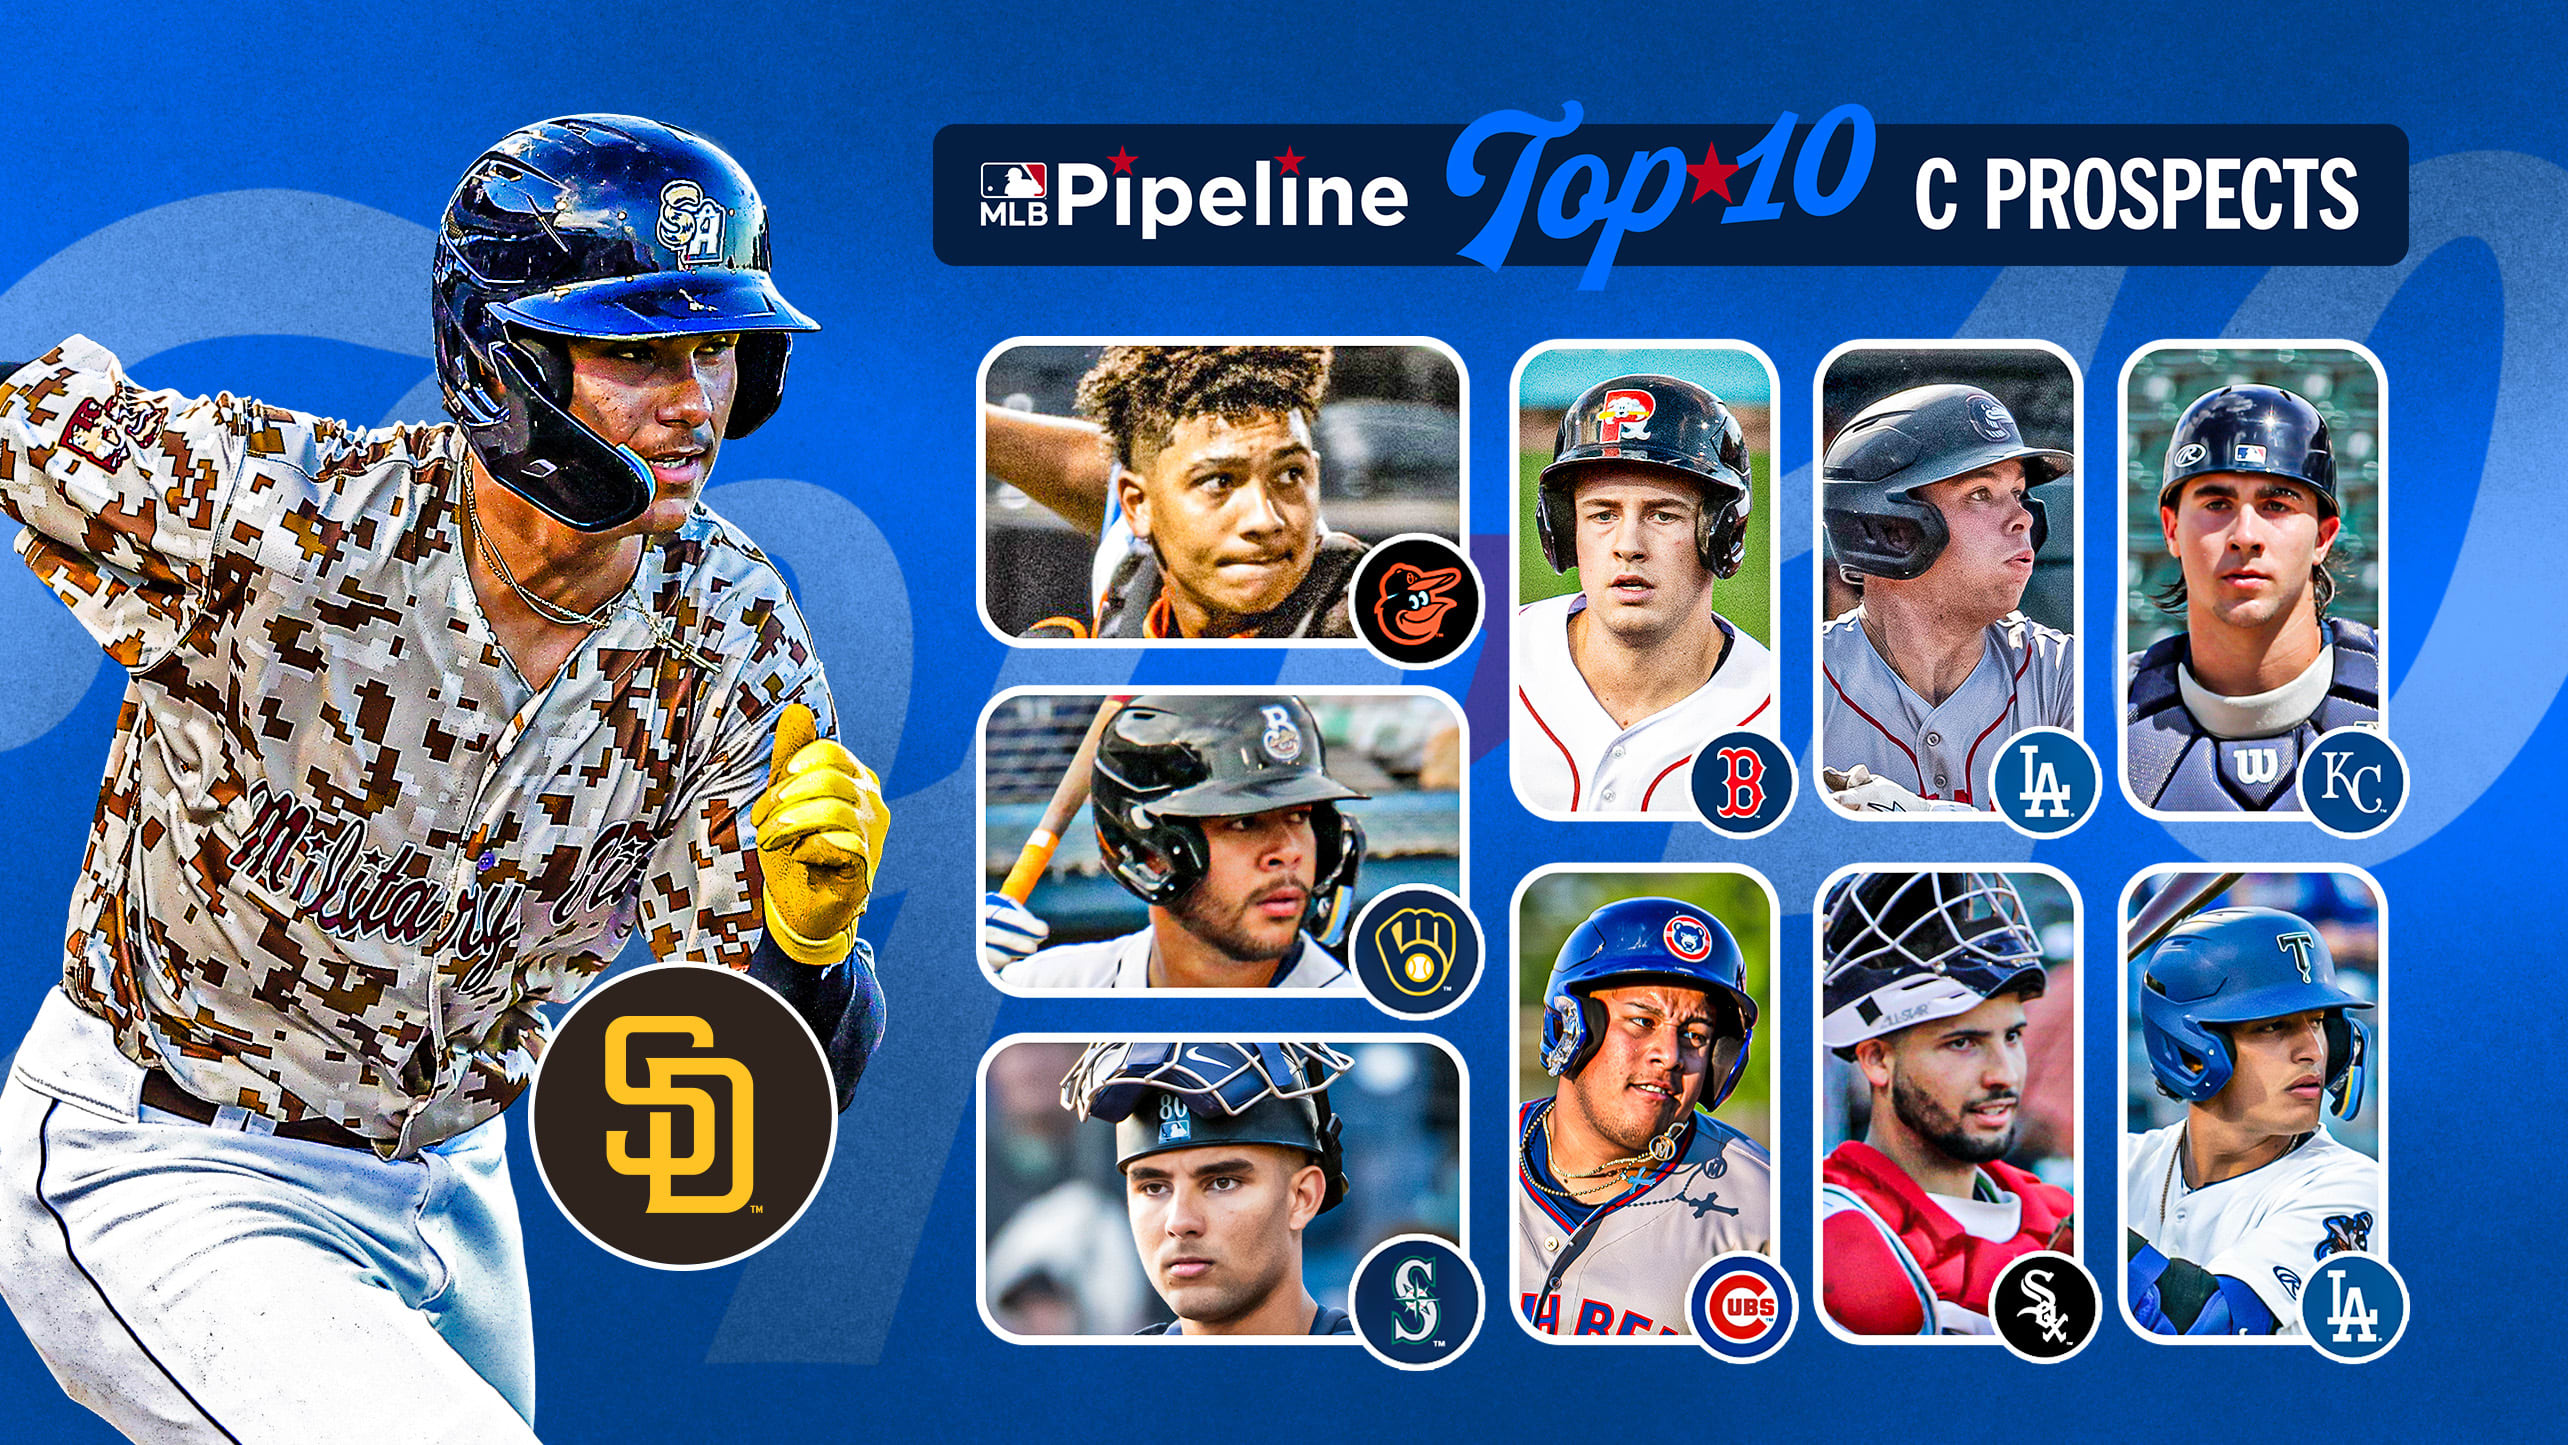 A collage of MLB Pipeline's top catching prospects